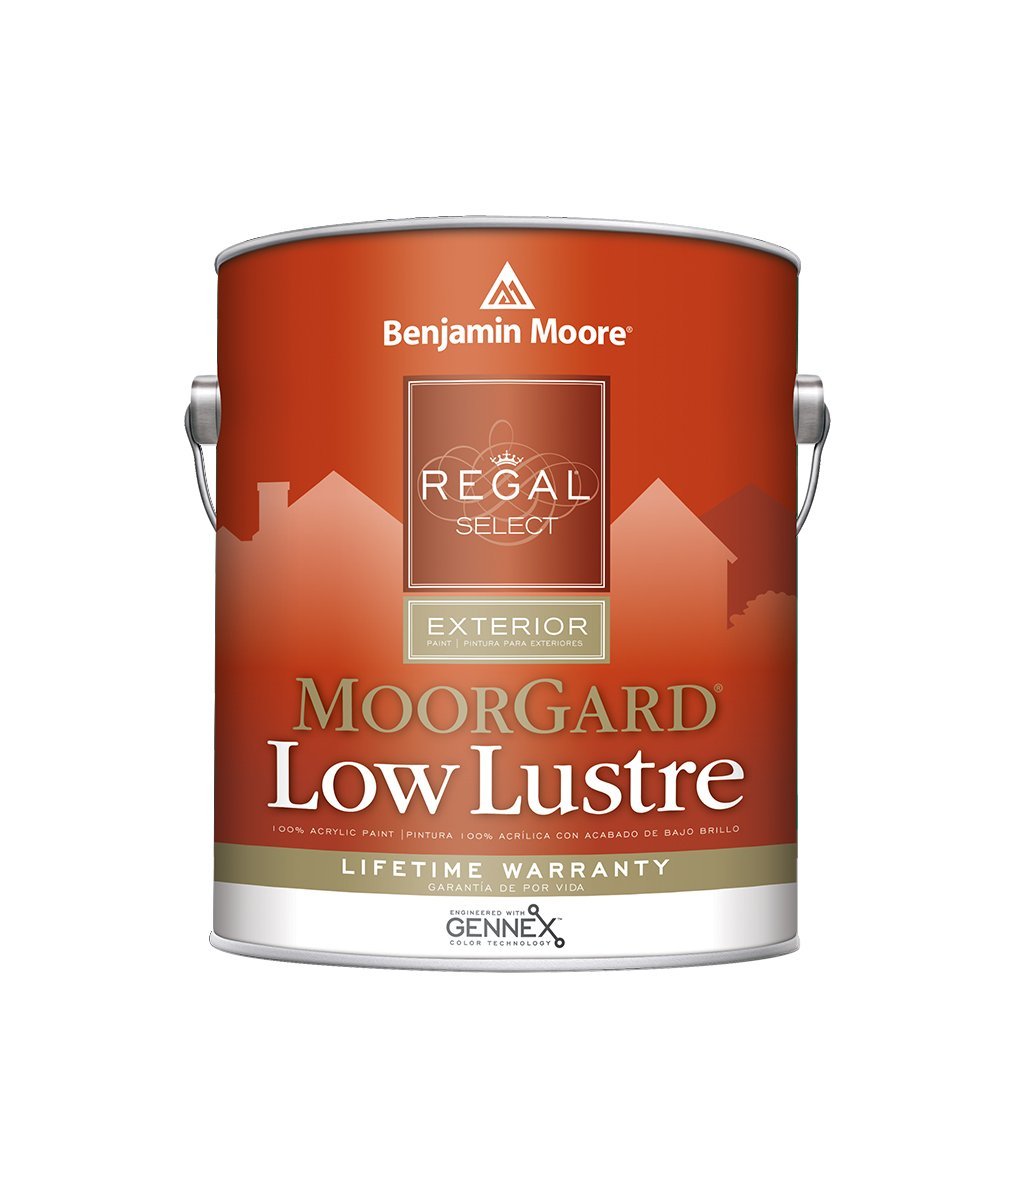 Benjamin Moore Regal Select Low Lustre Exterior Paint available at Mallory Paint Stores